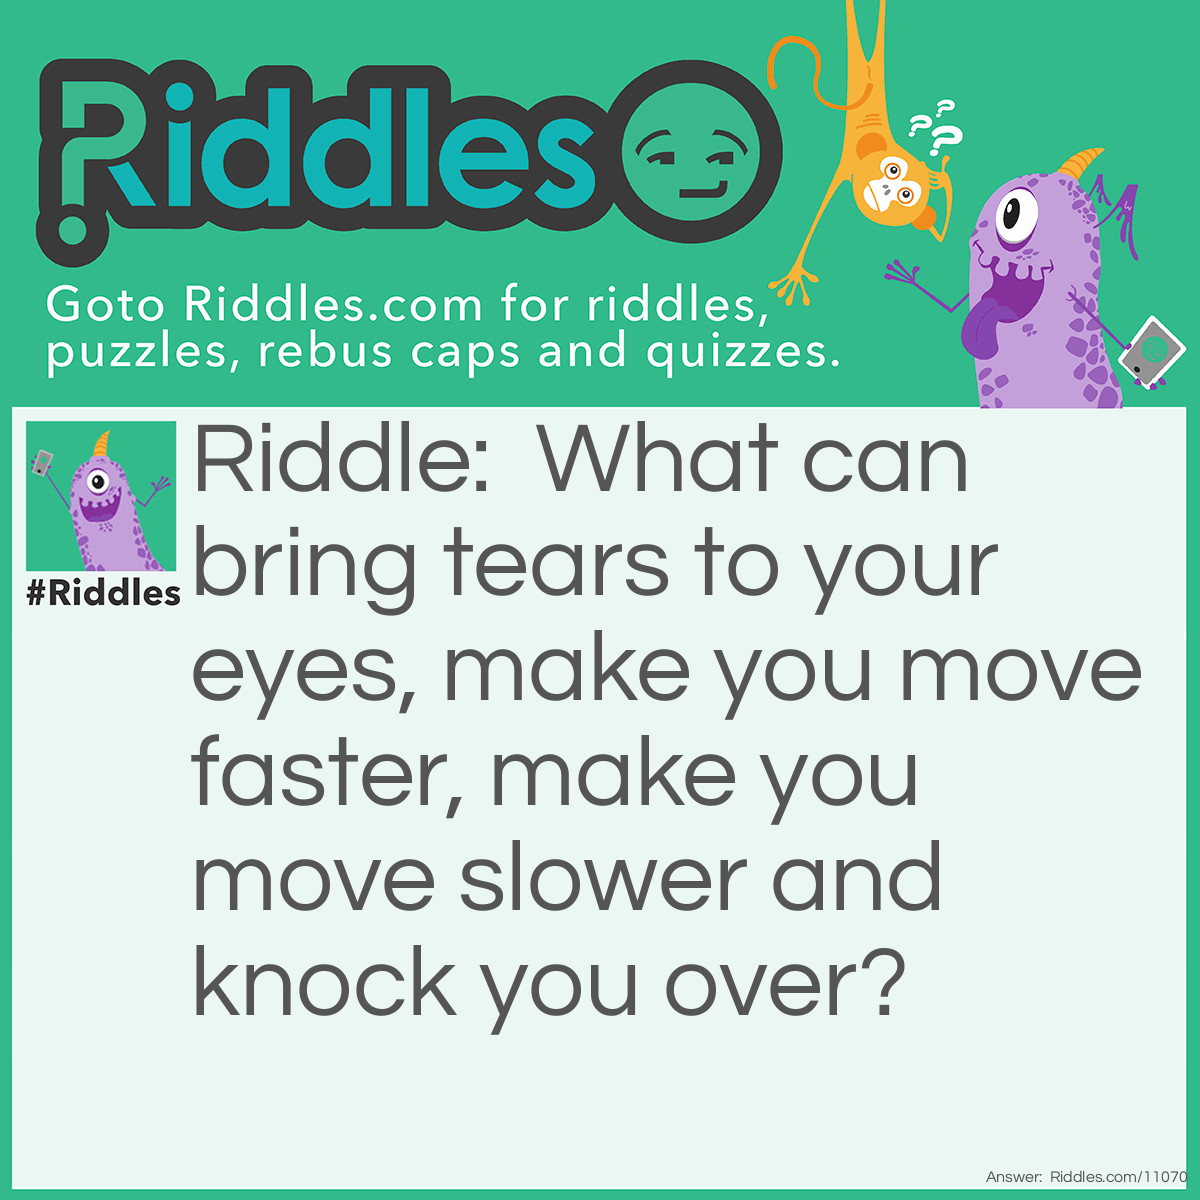 Riddle: What can bring tears to your eyes, make you move faster, make you move slower and knock you over? Answer: The wind.